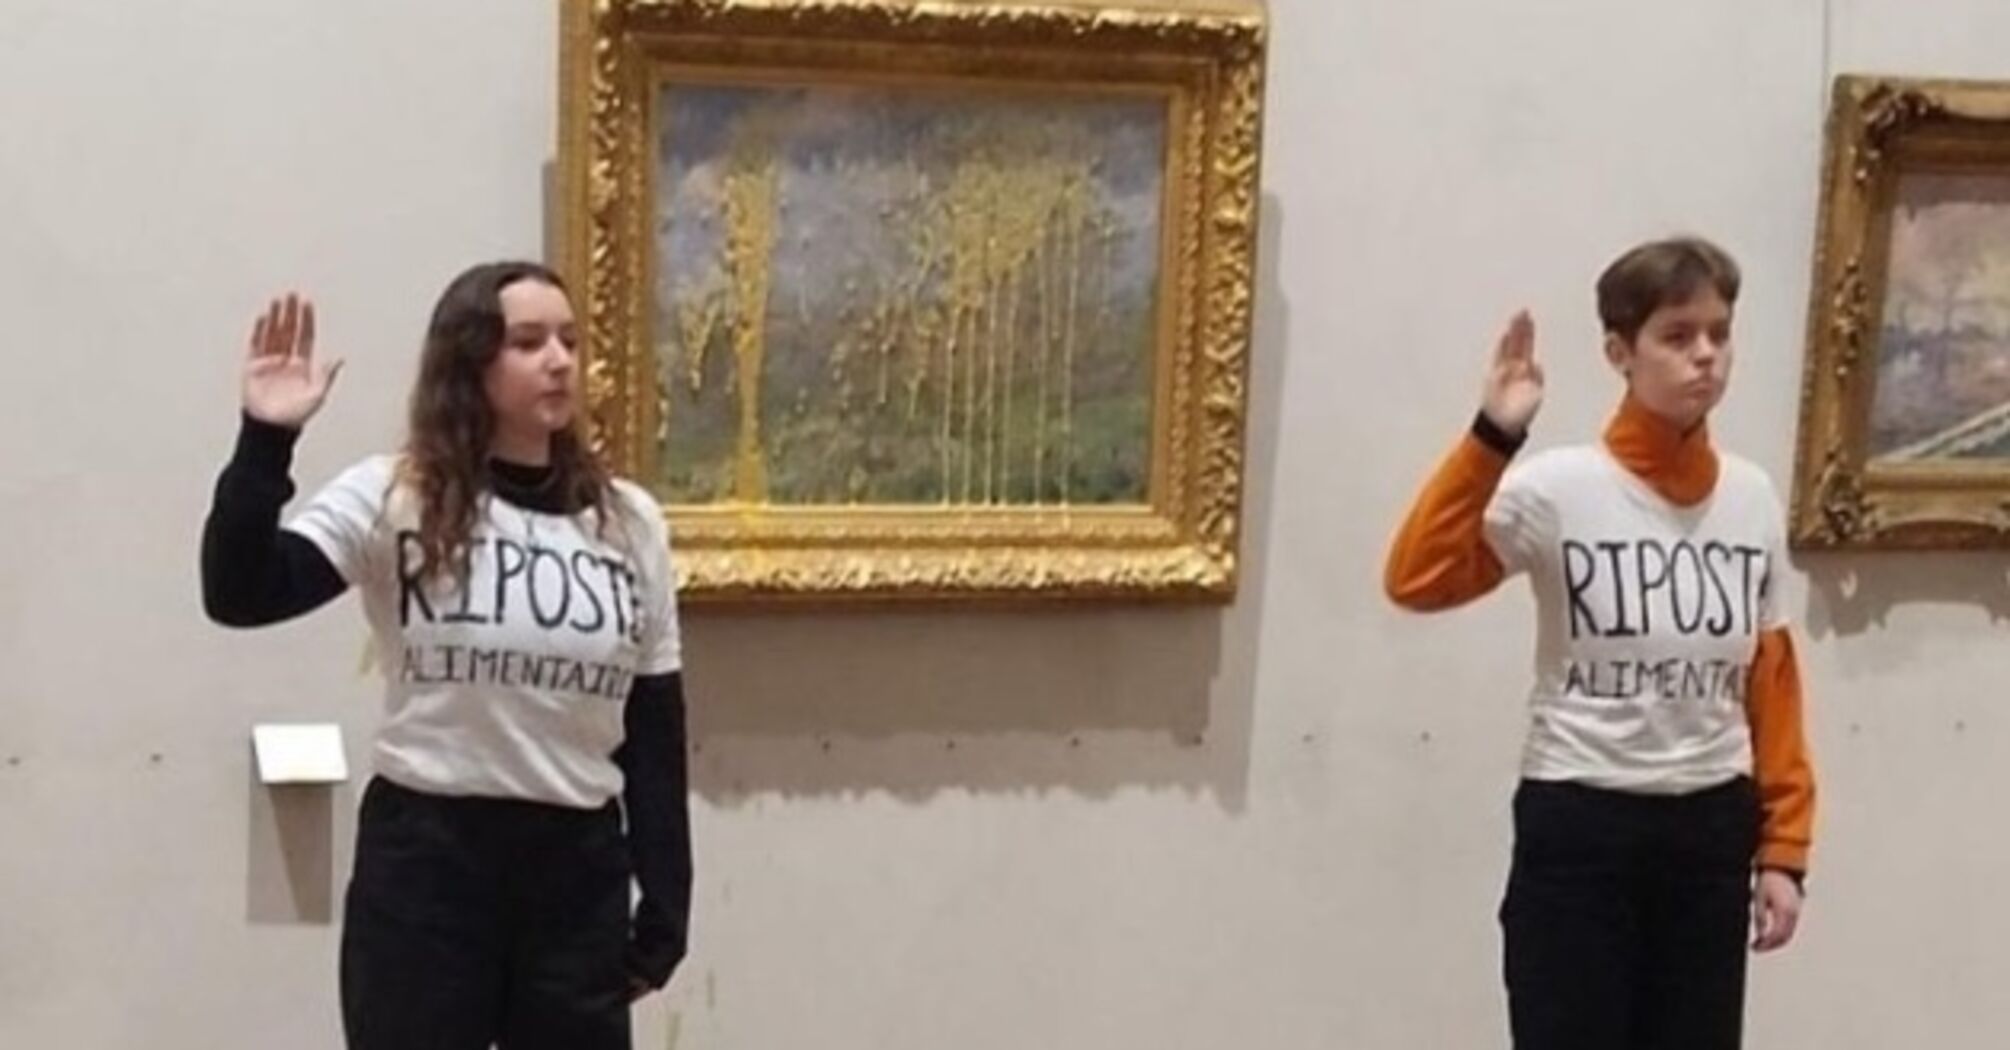 Activists poured soup on Claude Monet's painting "Spring"